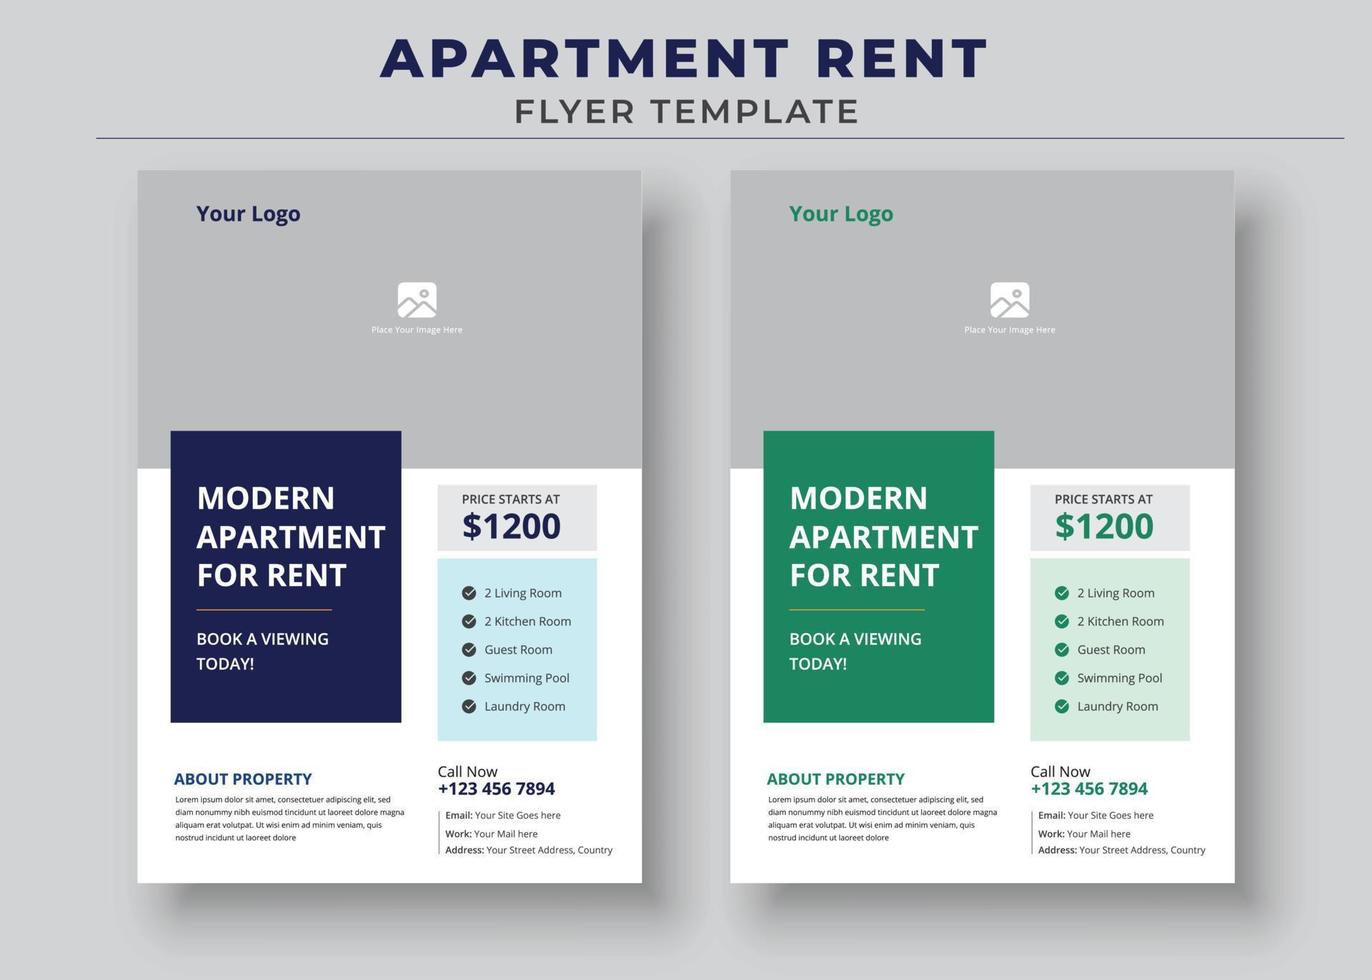 Modern Apartment For Rent Poster, Apartment Rent Flyer Template, Home For Rent Flyer, Real Estate Flyer vector